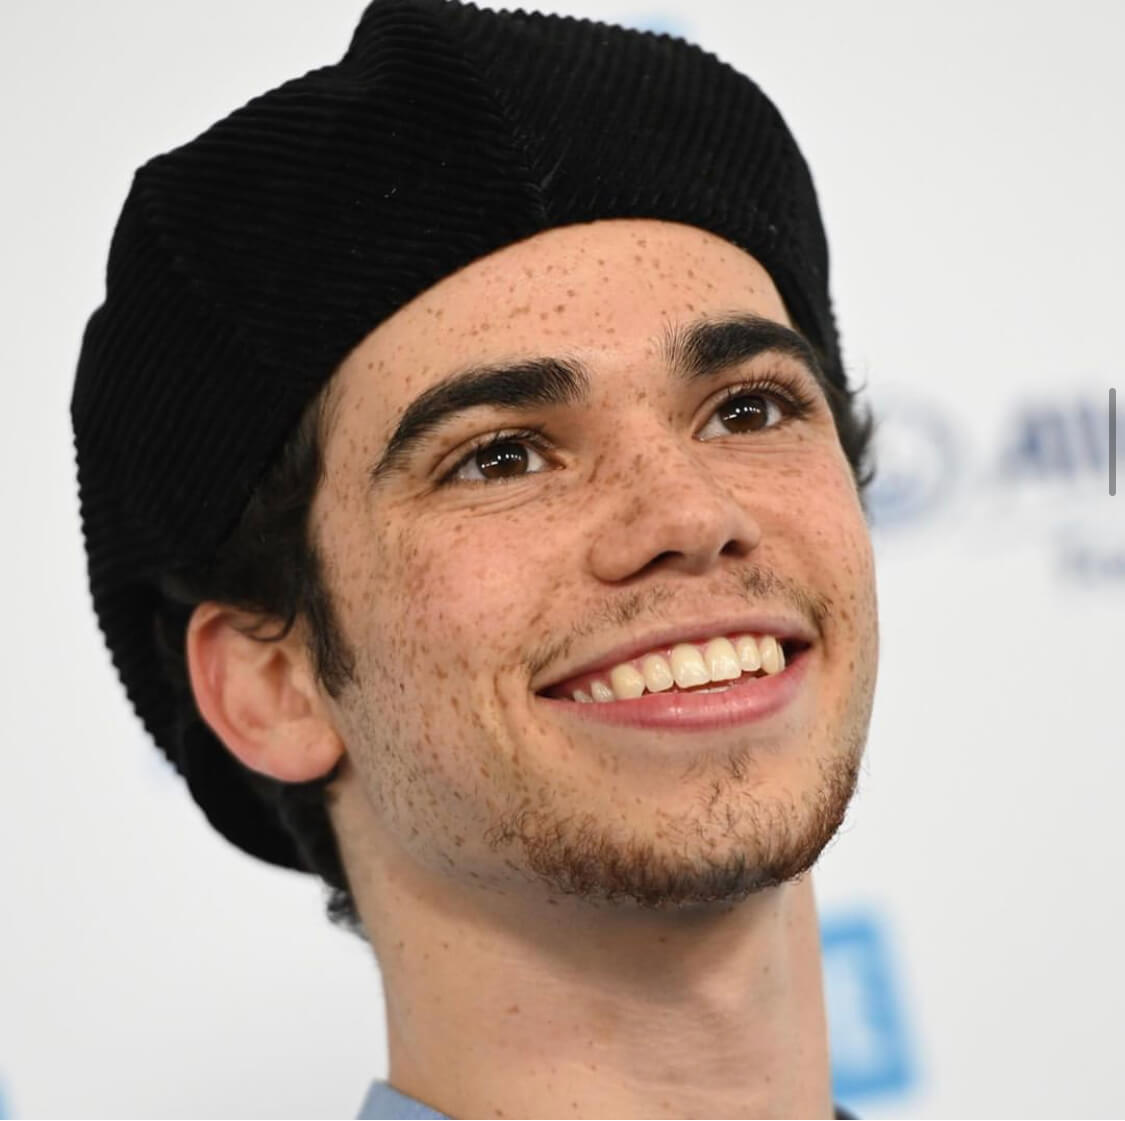 Disney to Cancel Descendants 3 Premiere Event and Decides to Honor Cameron Boyce in a Special Way.